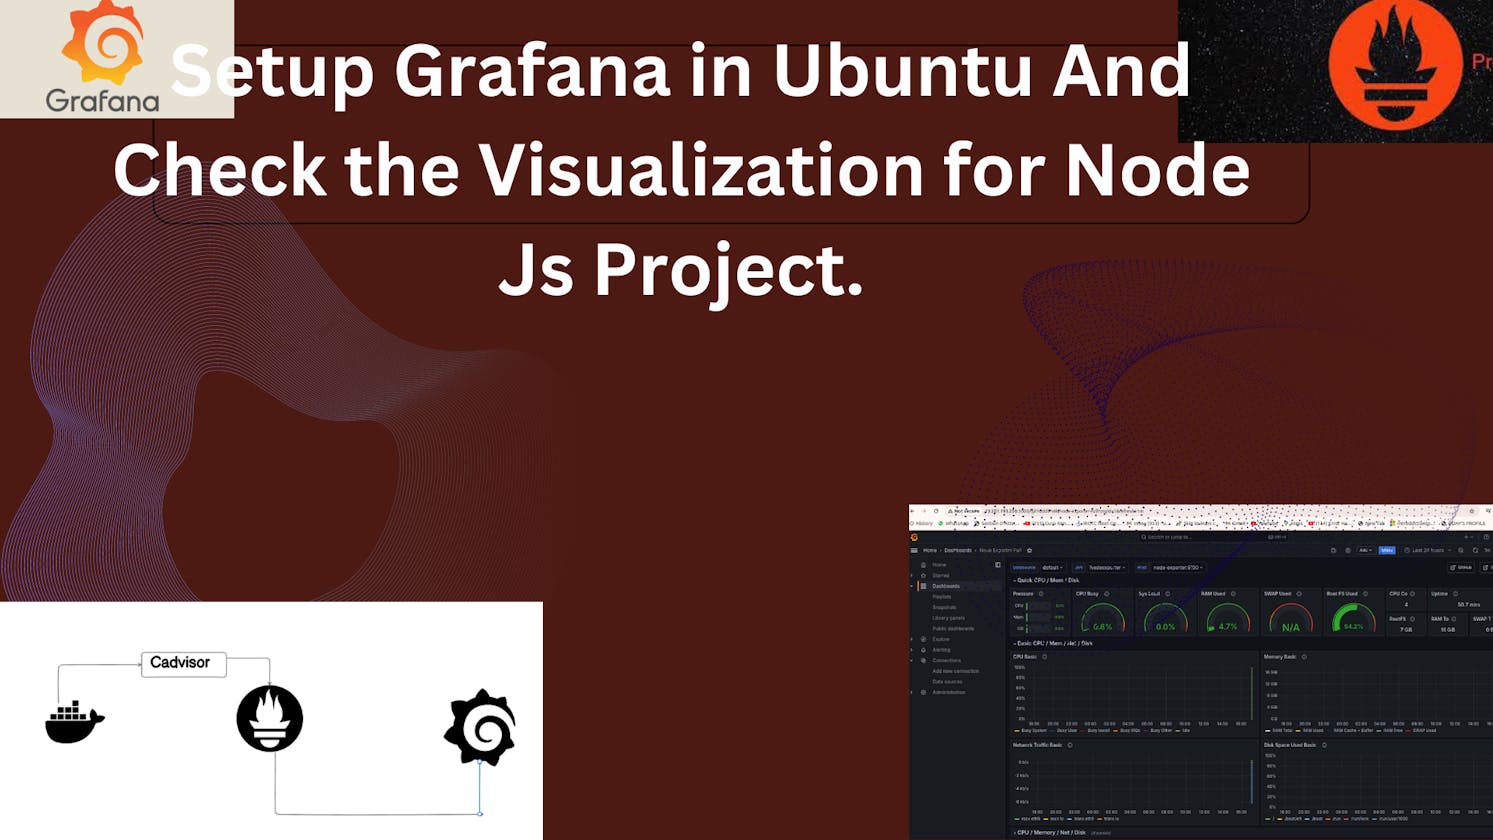 Setup Grafana in Ubuntu And Check the Visualization for Node Js Project.